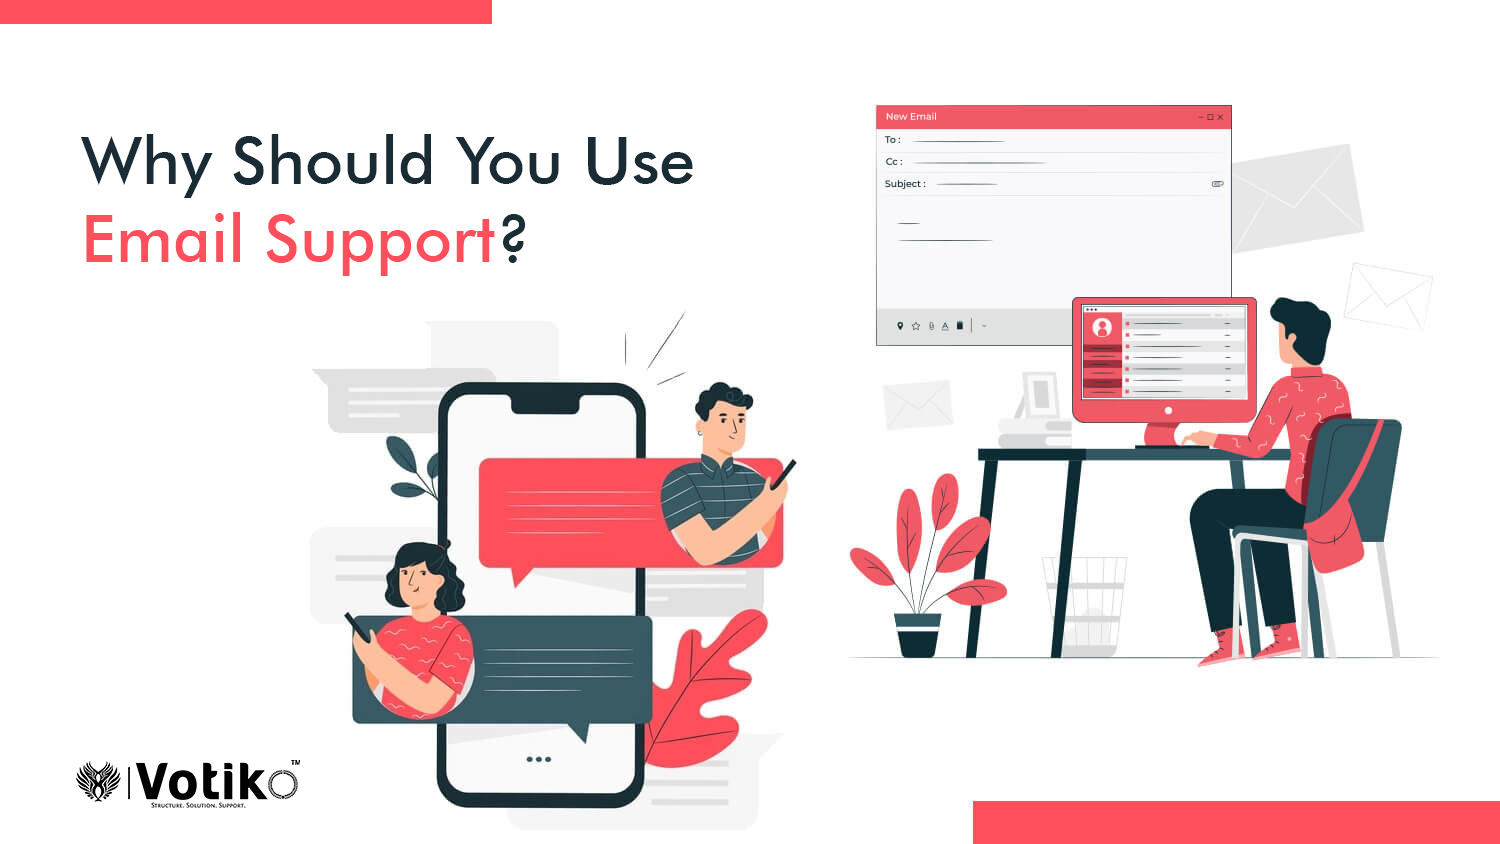 Why Should You Use Email Support?